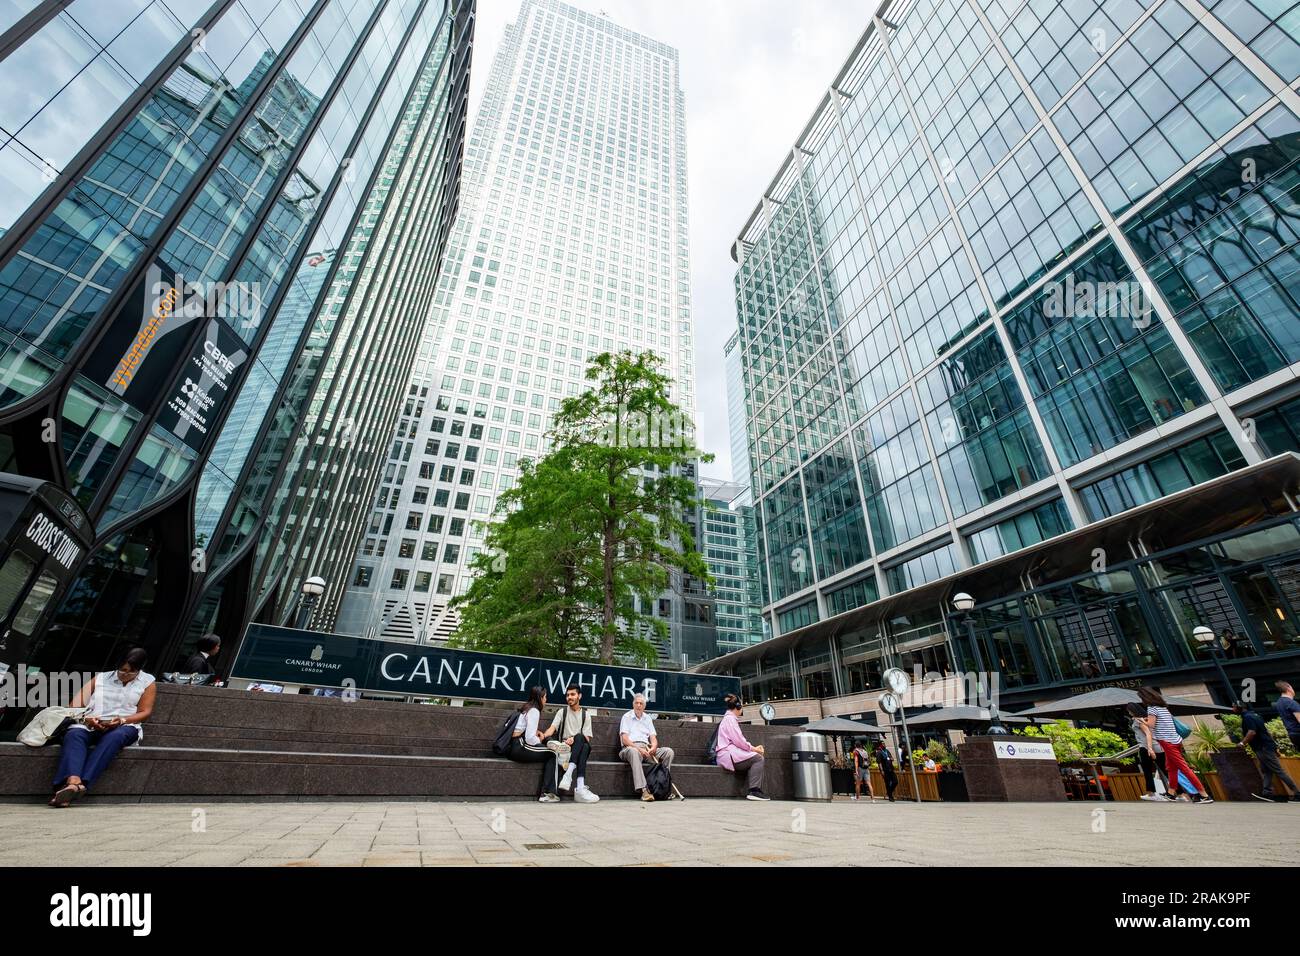 London- June 2023: Canary Wharf buildings and office workers on Reuters Plaza- Major London financial centre Stock Photo